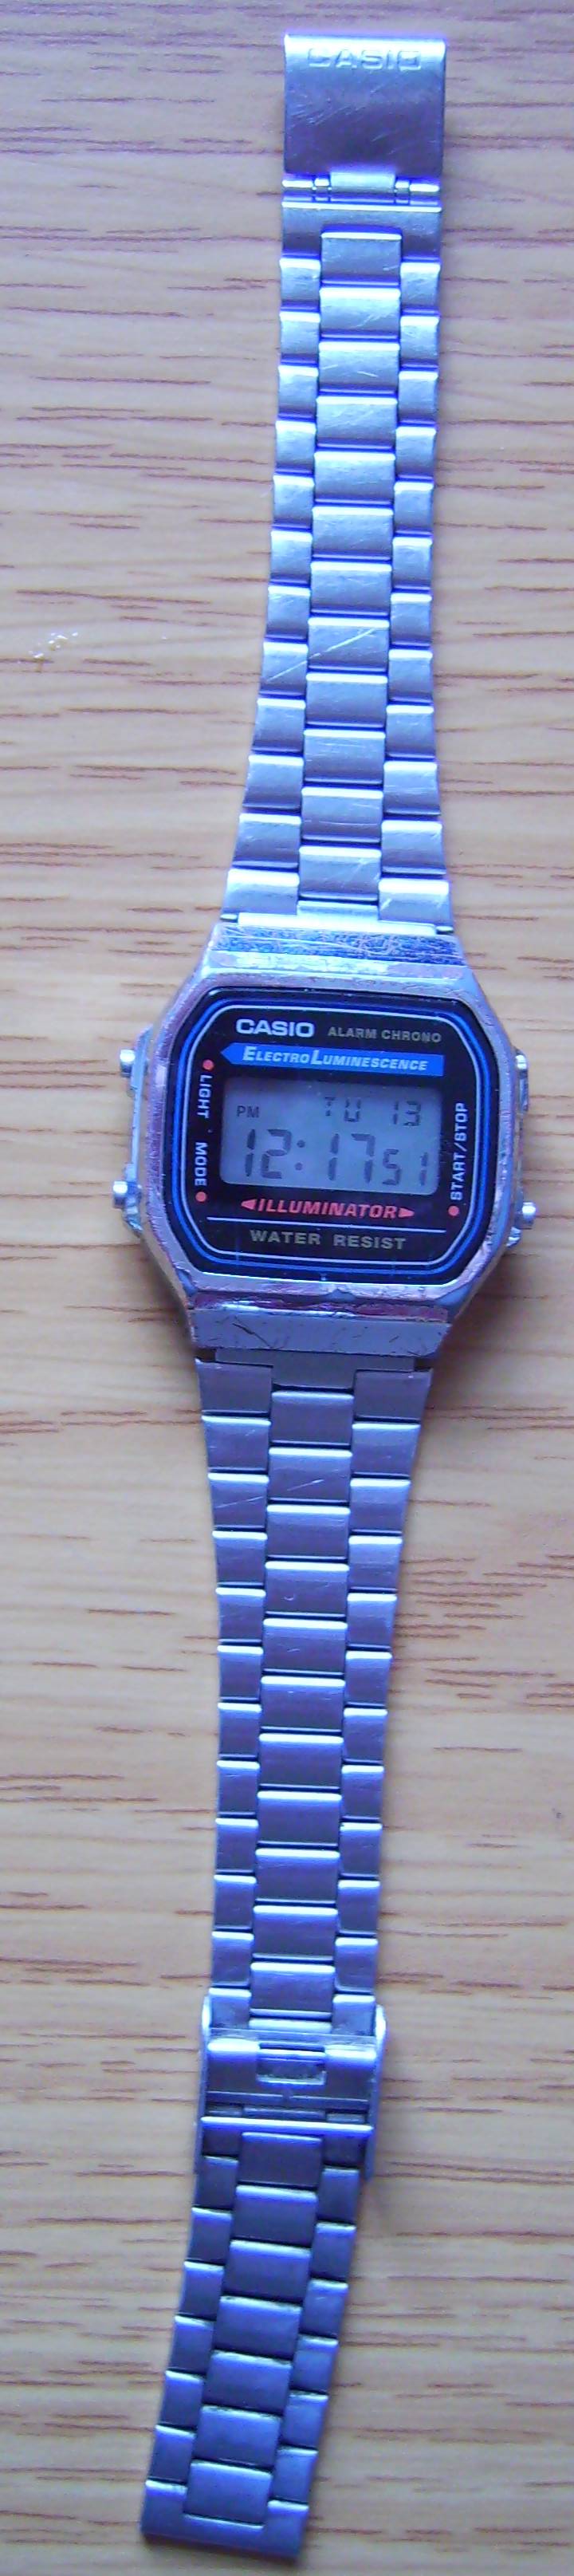 The watch in question (CASIO 1572)